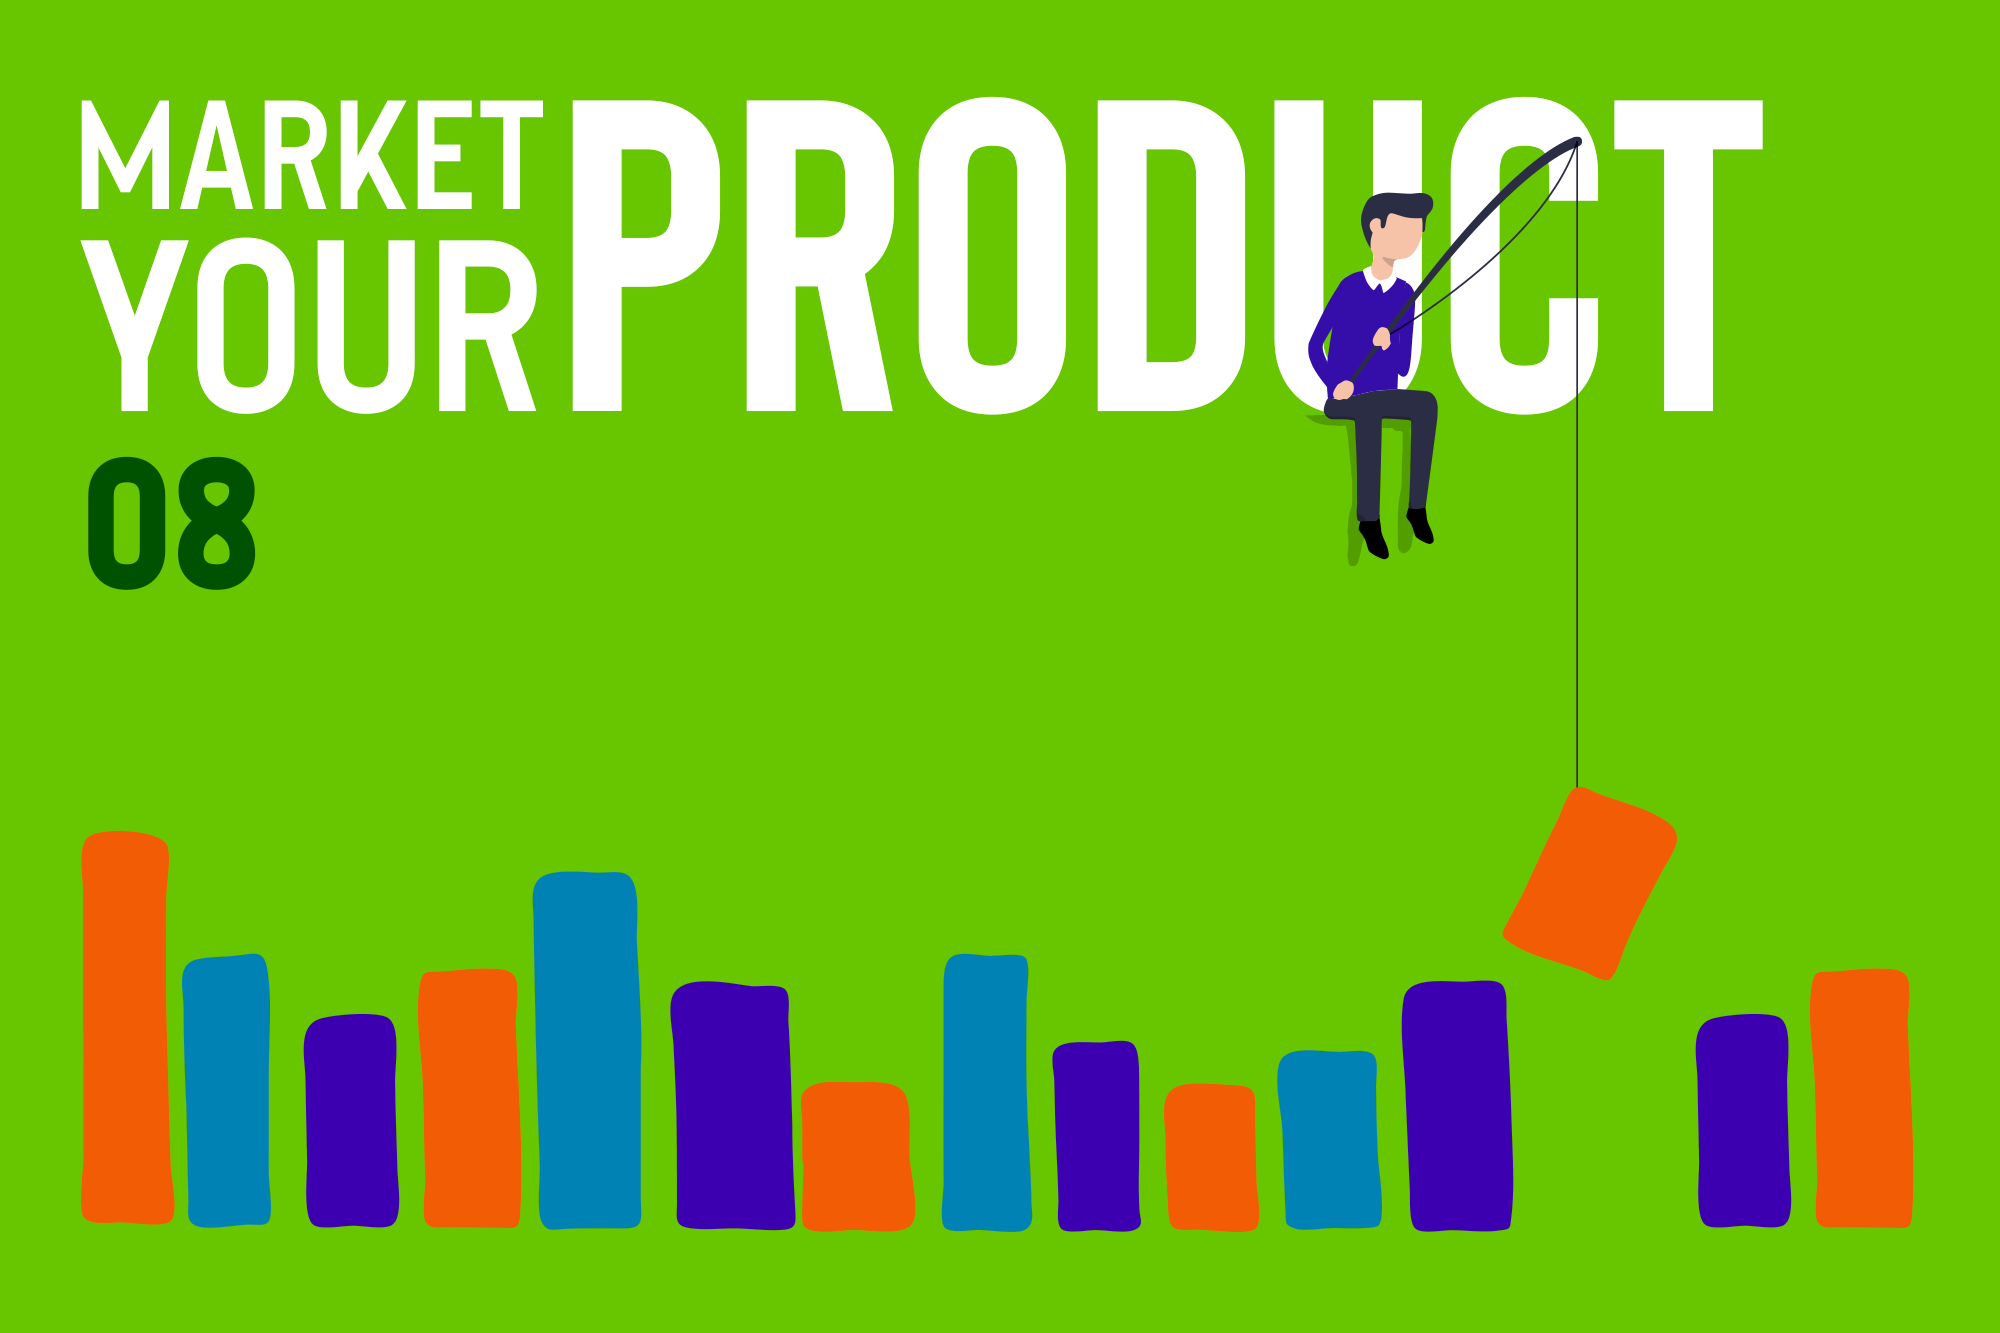 Market Your Product